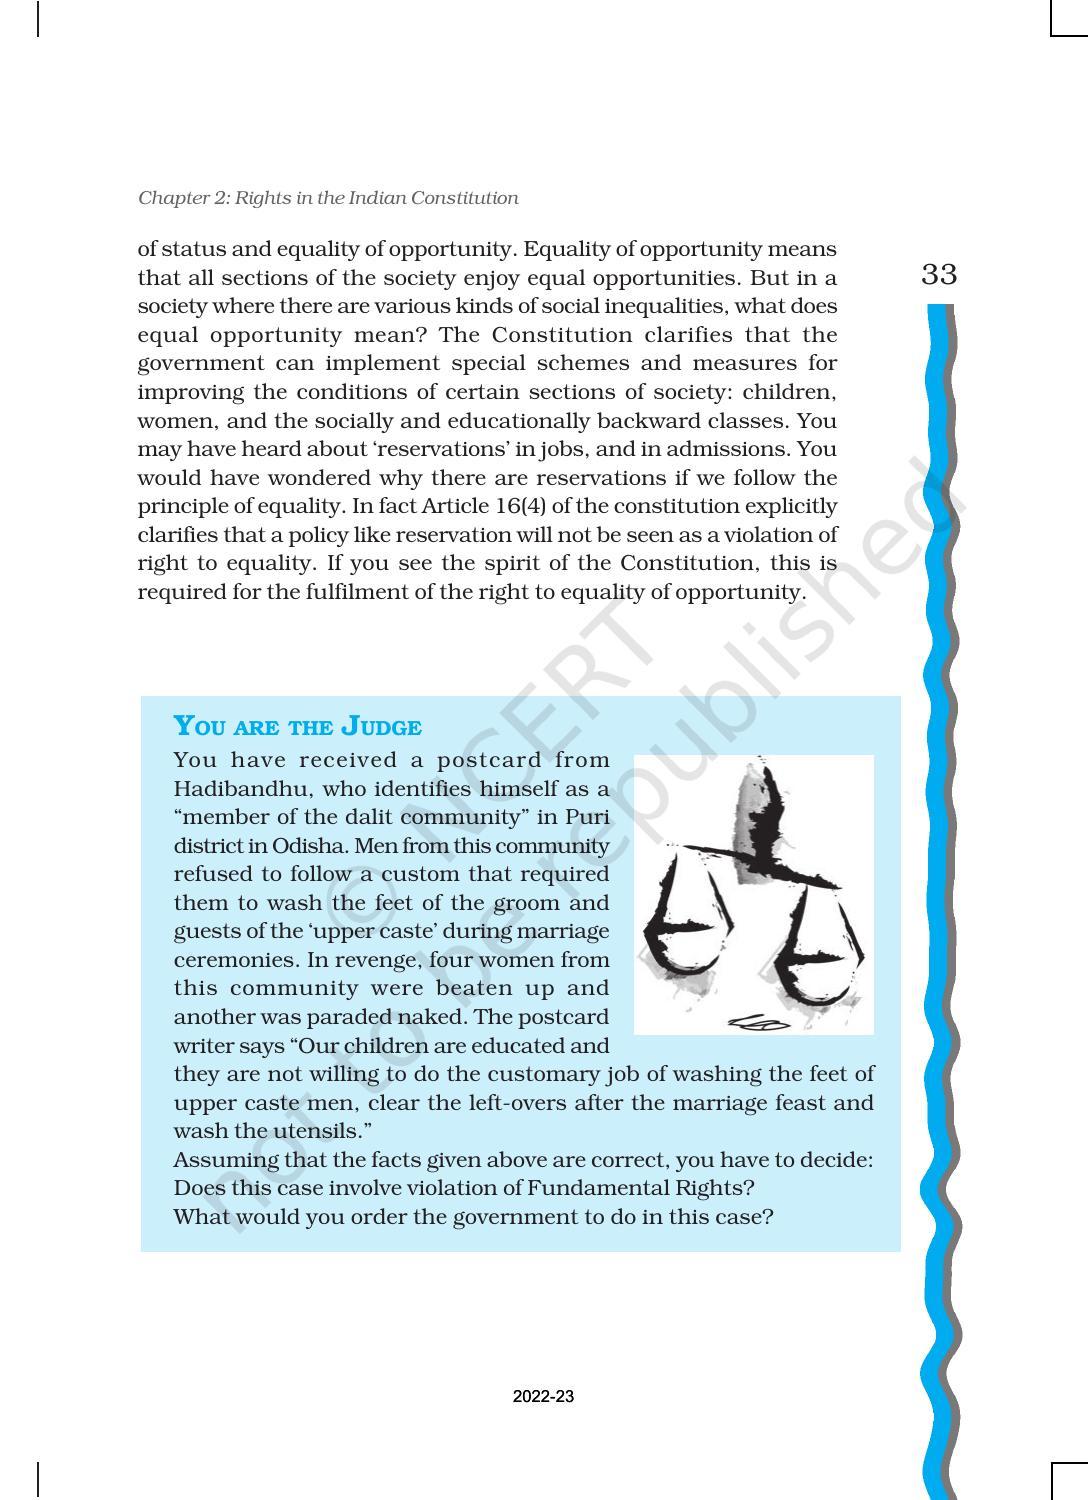 NCERT Book for Class 11 Political Science (Indian Constitution at Work) Chapter 2 Rights in the Indian Constitution - Page 8